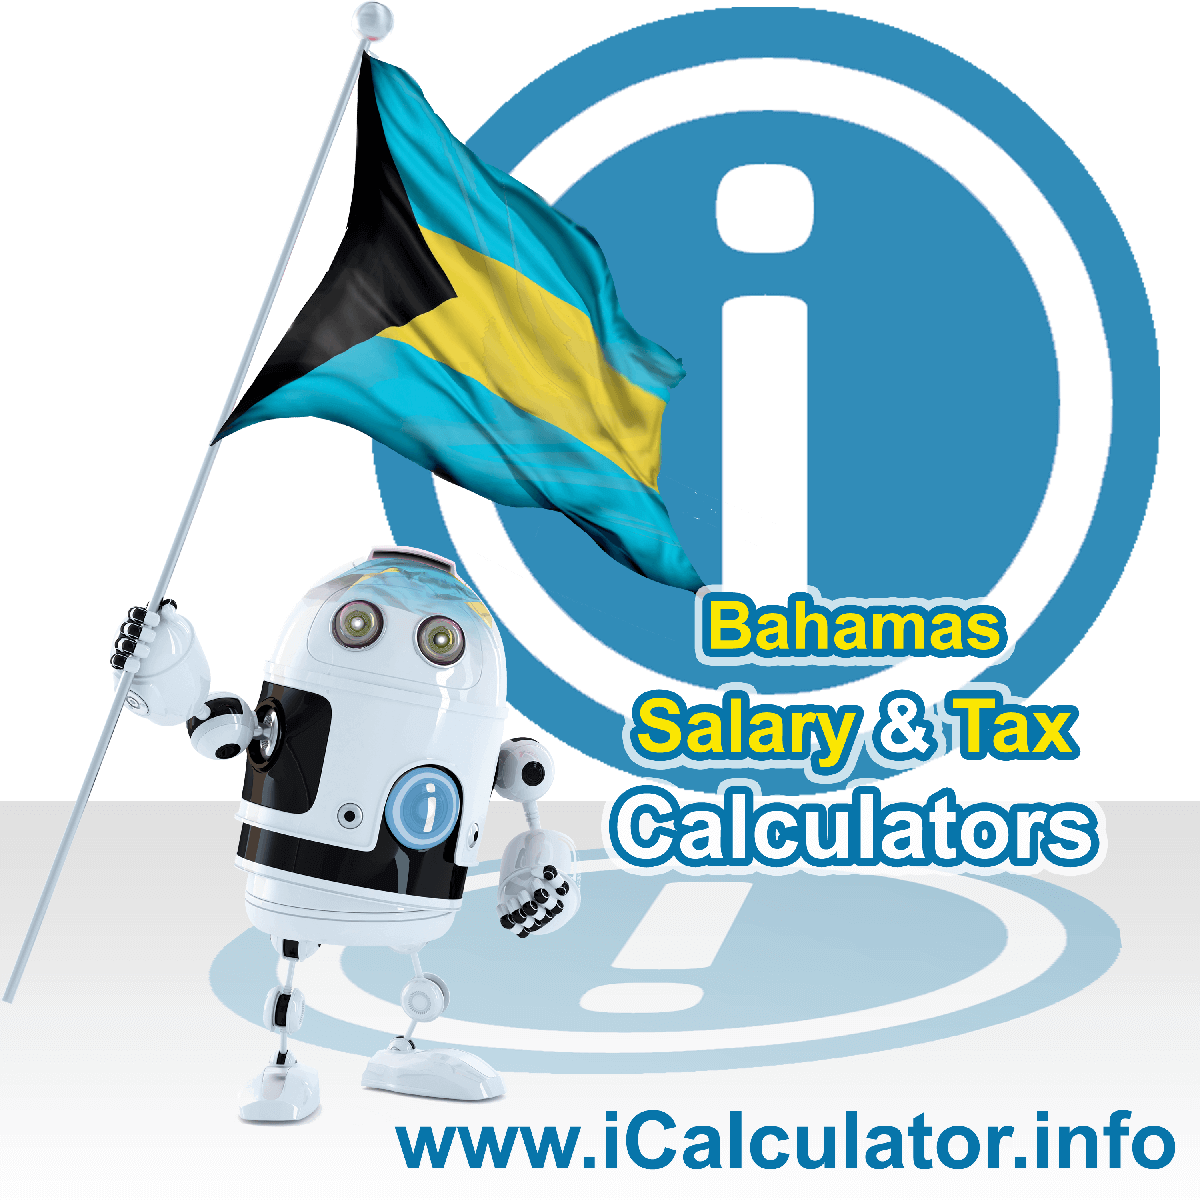 Bahamas Salary Calculator. This image shows the Bahamasese flag and information relating to the tax formula for the Bahamas Tax Calculator